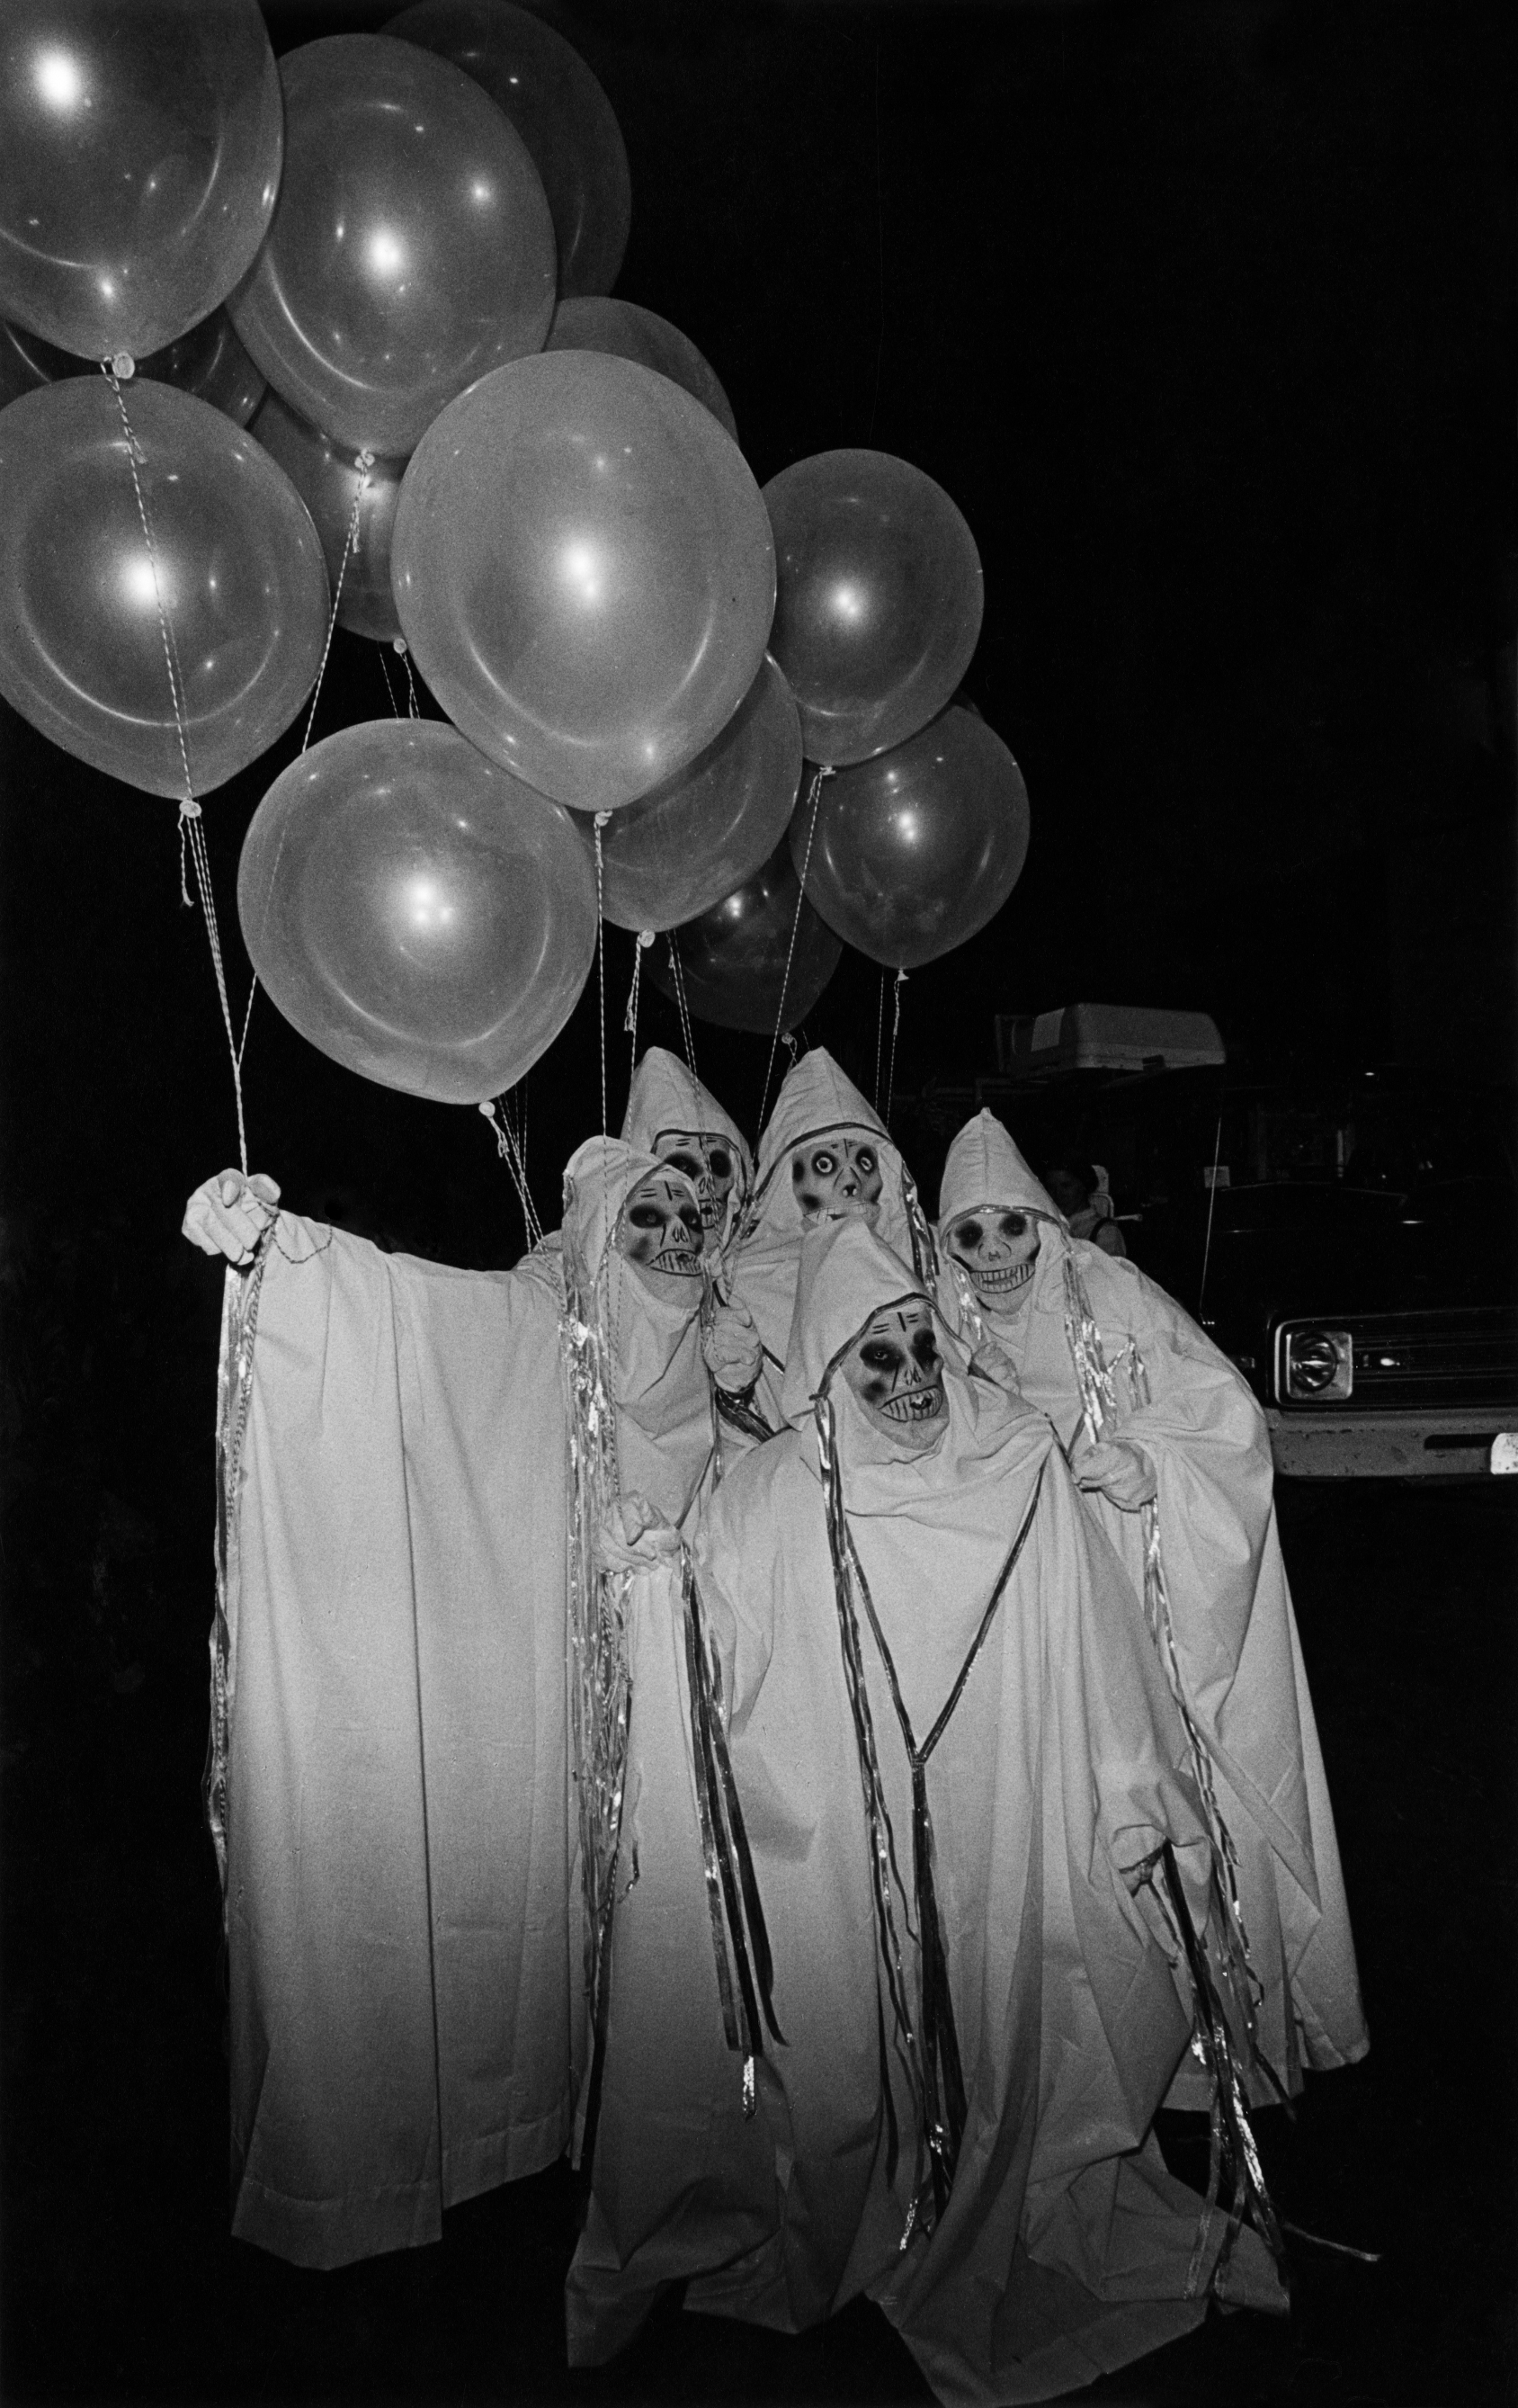 A group of ghouls at the New York City Halloween Parade, 1979.